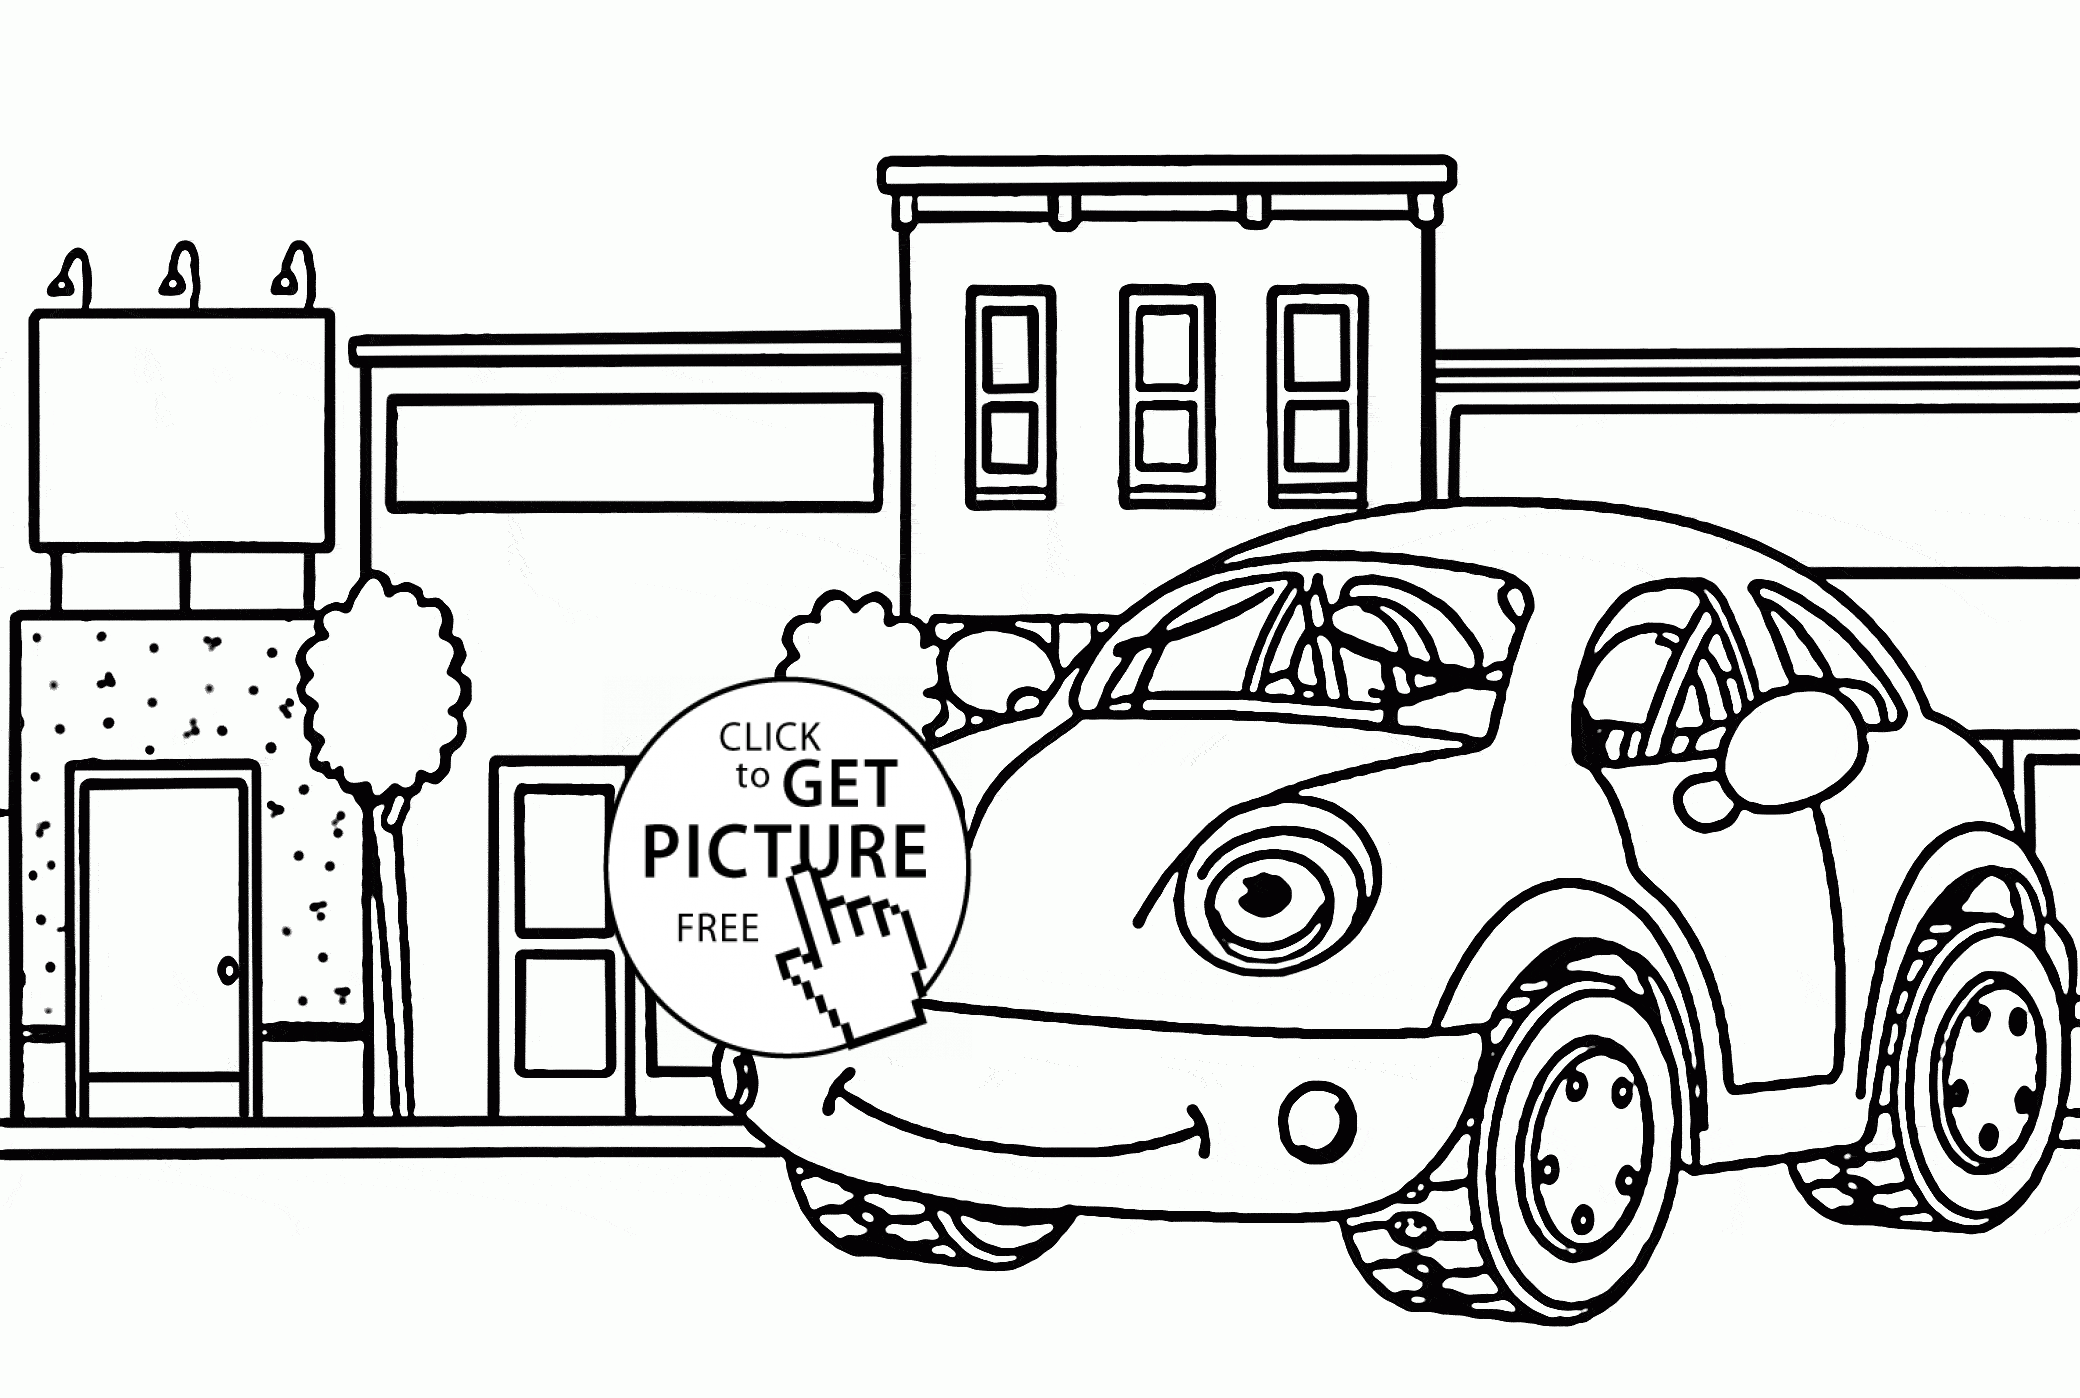 Funny Car in Town coloring page for kids, transportation coloring ...